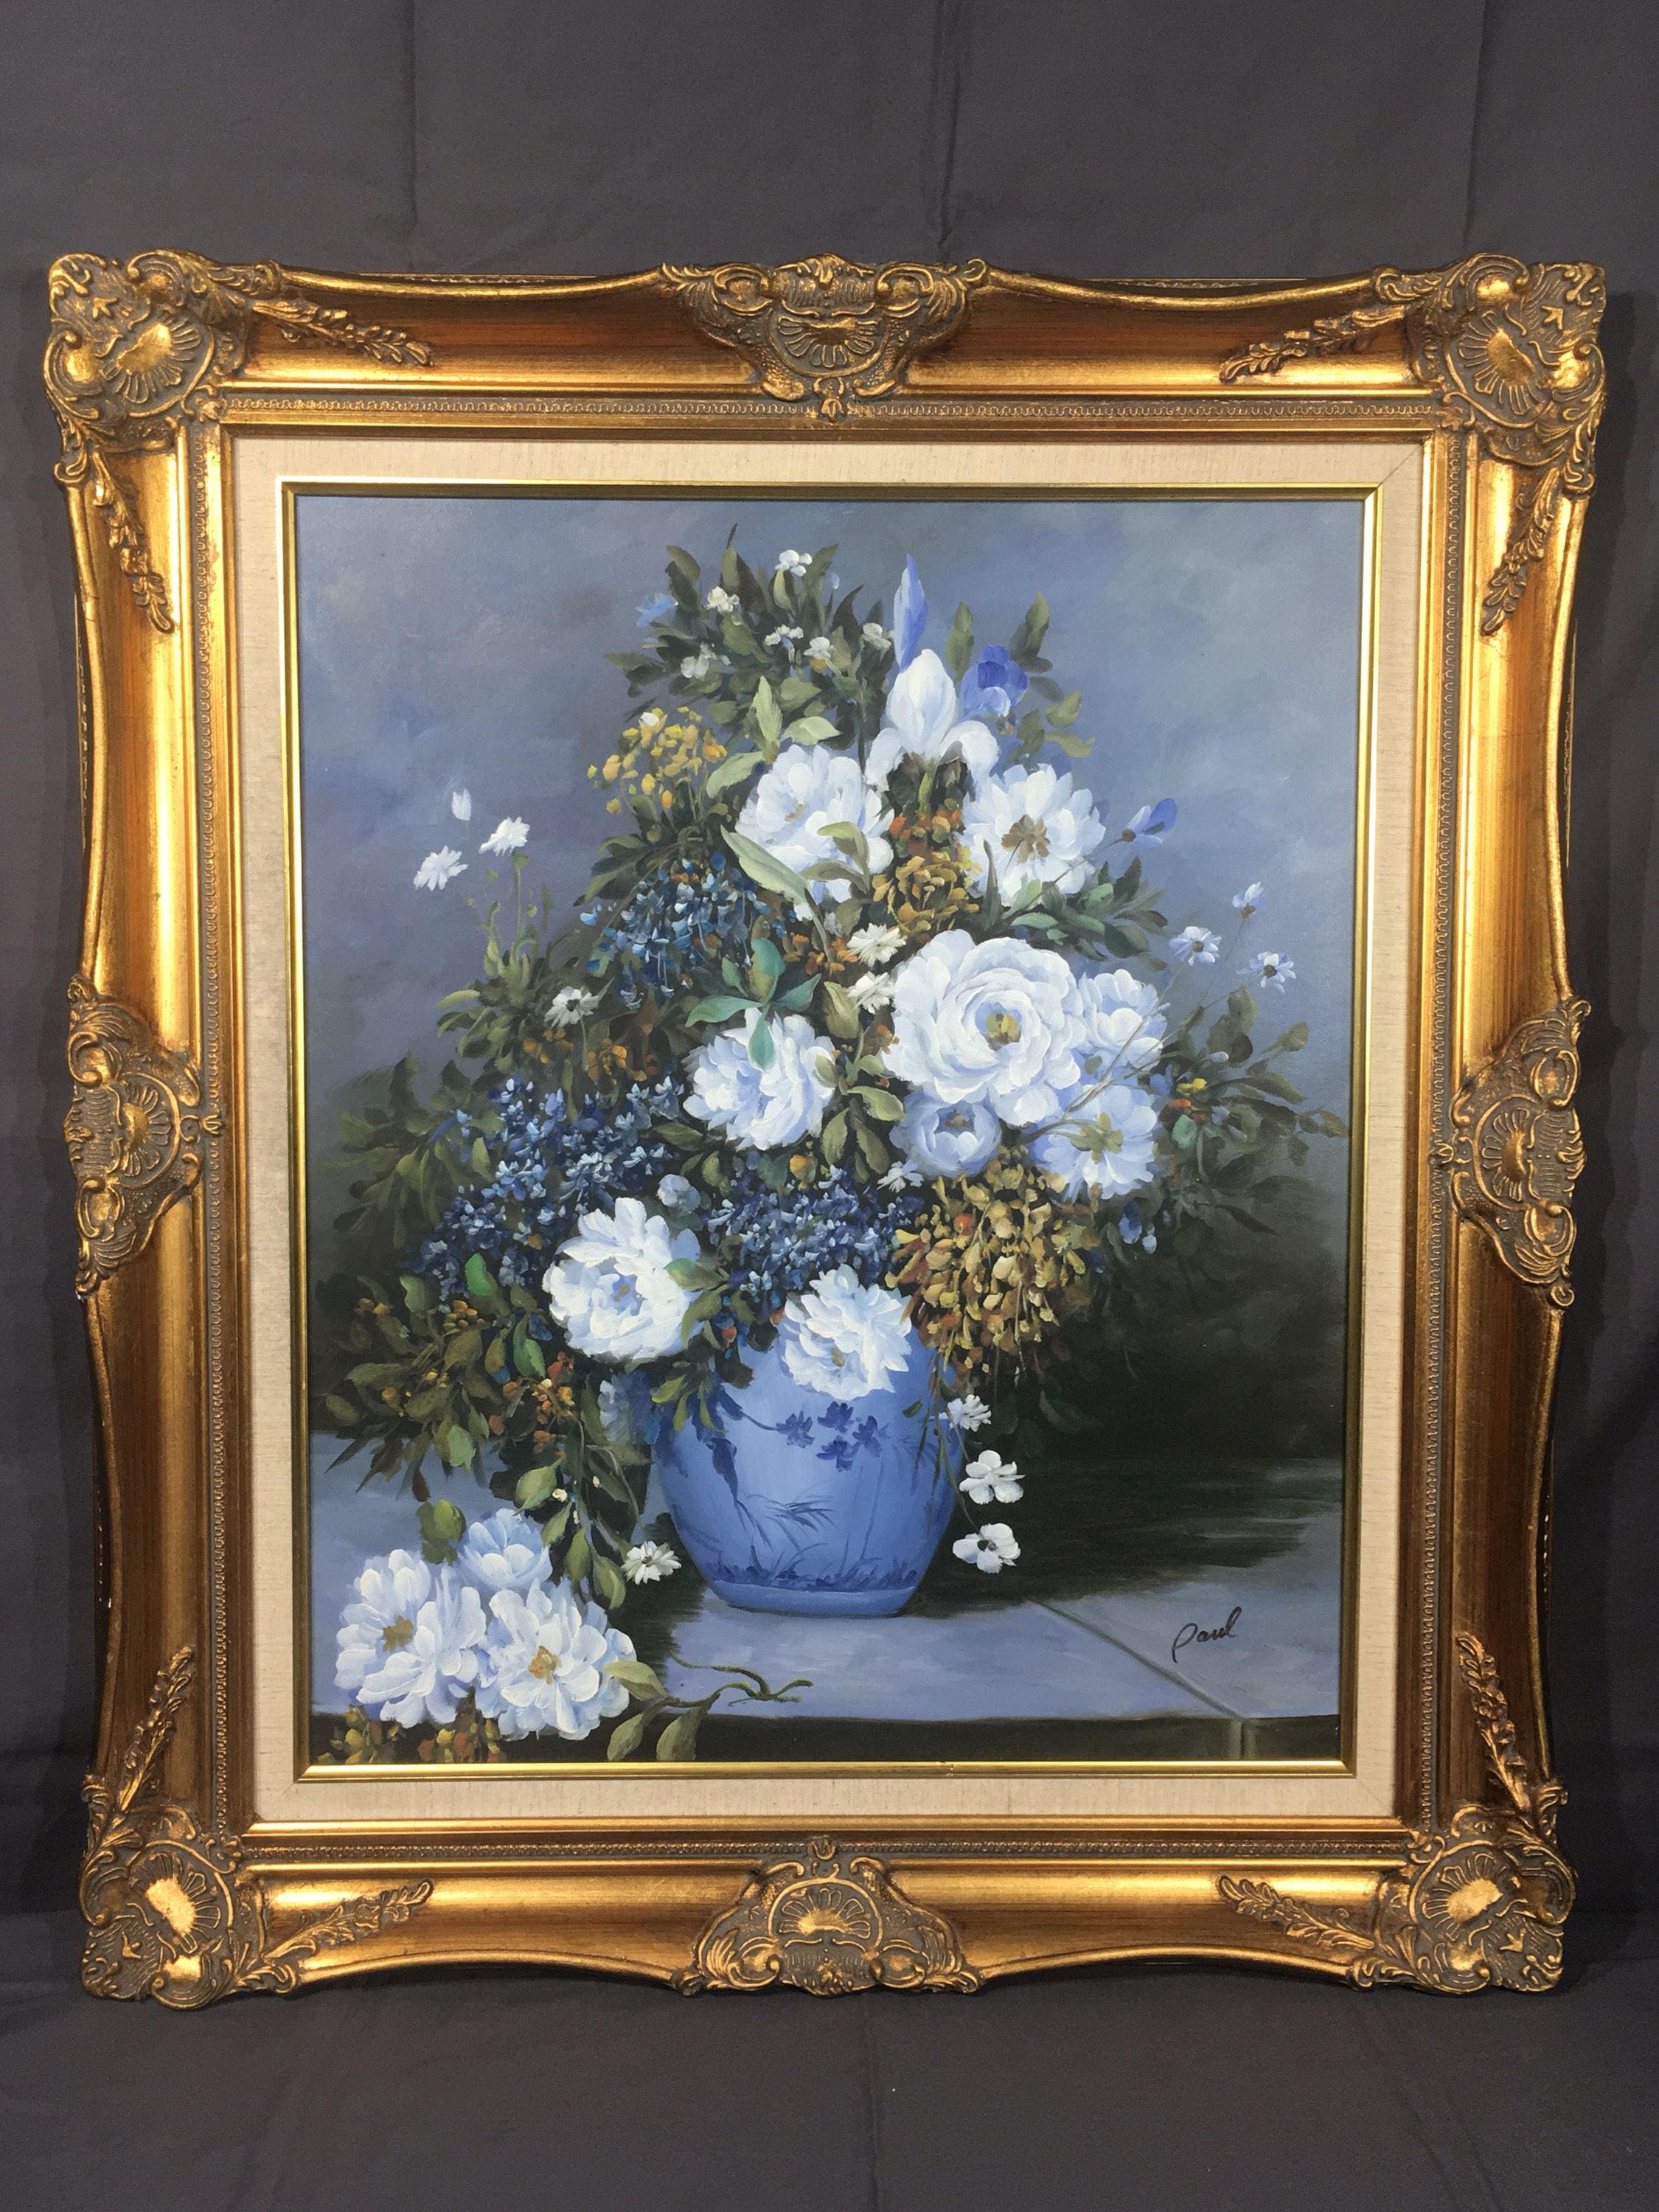 Vintage Oil Painting, Signed by Paul Flower Pot on Canvas,Decorative ...